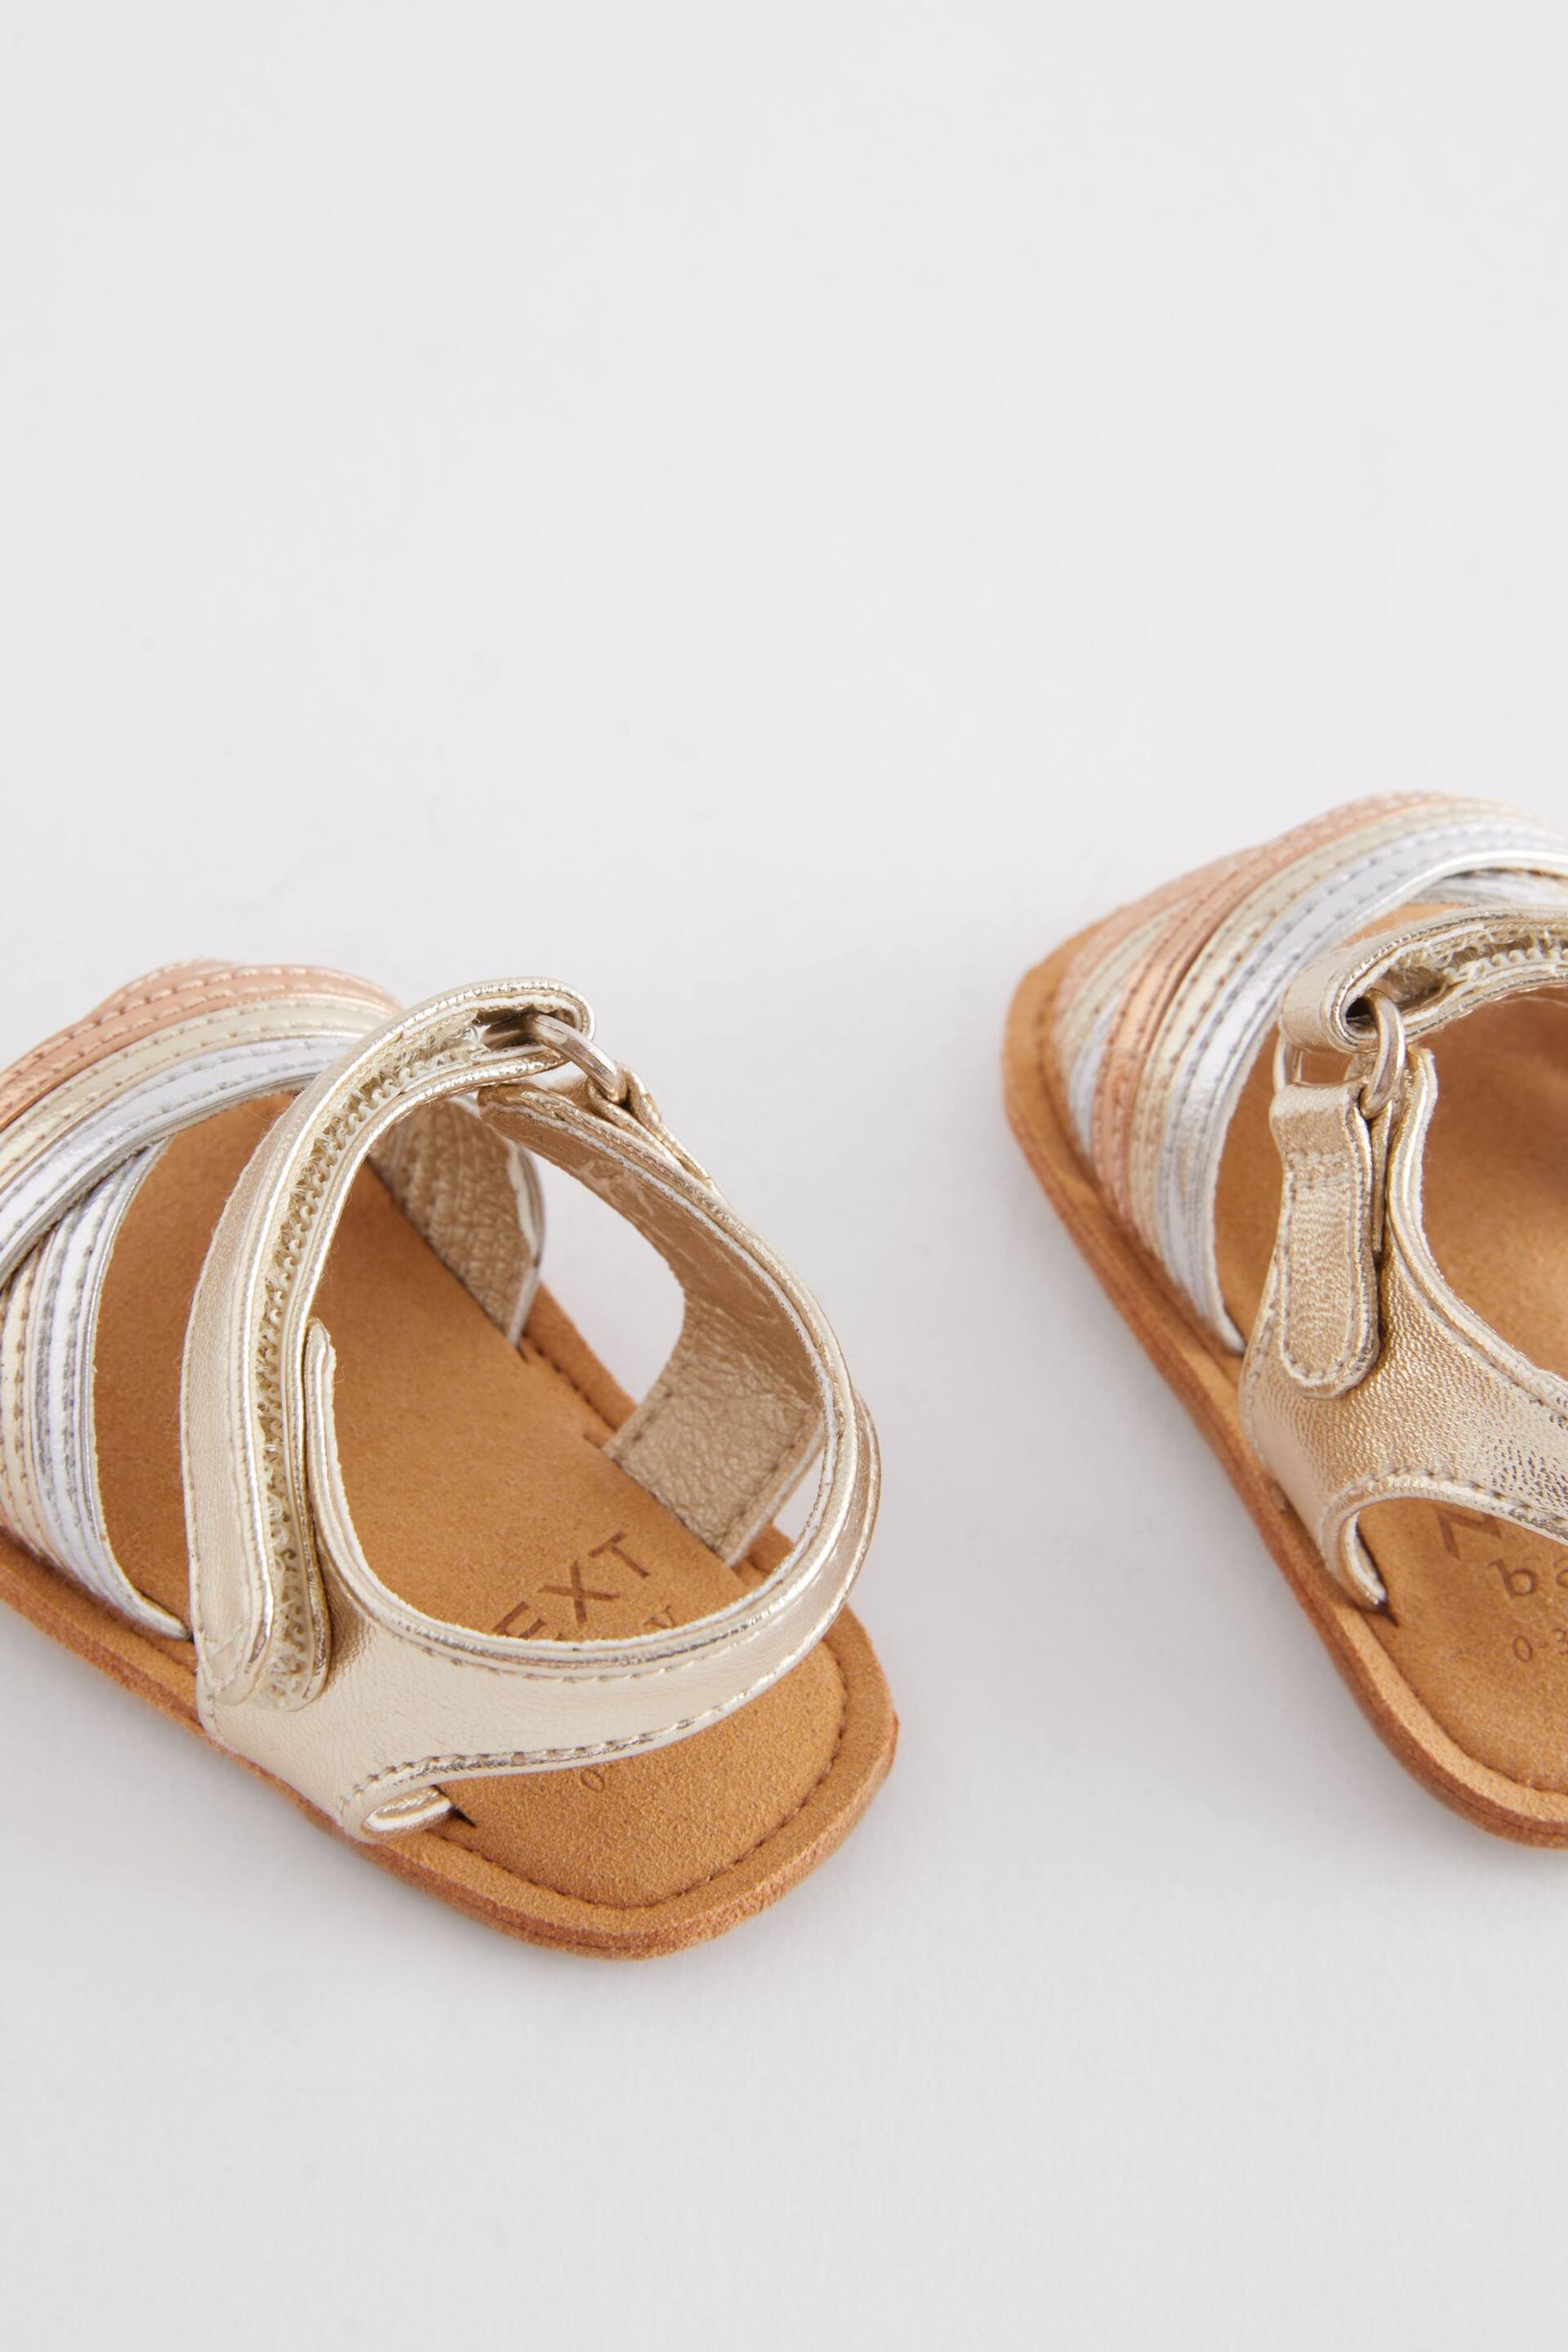 Gold Cross Strap Baby Sandals (0-24mths) - Image 3 of 5